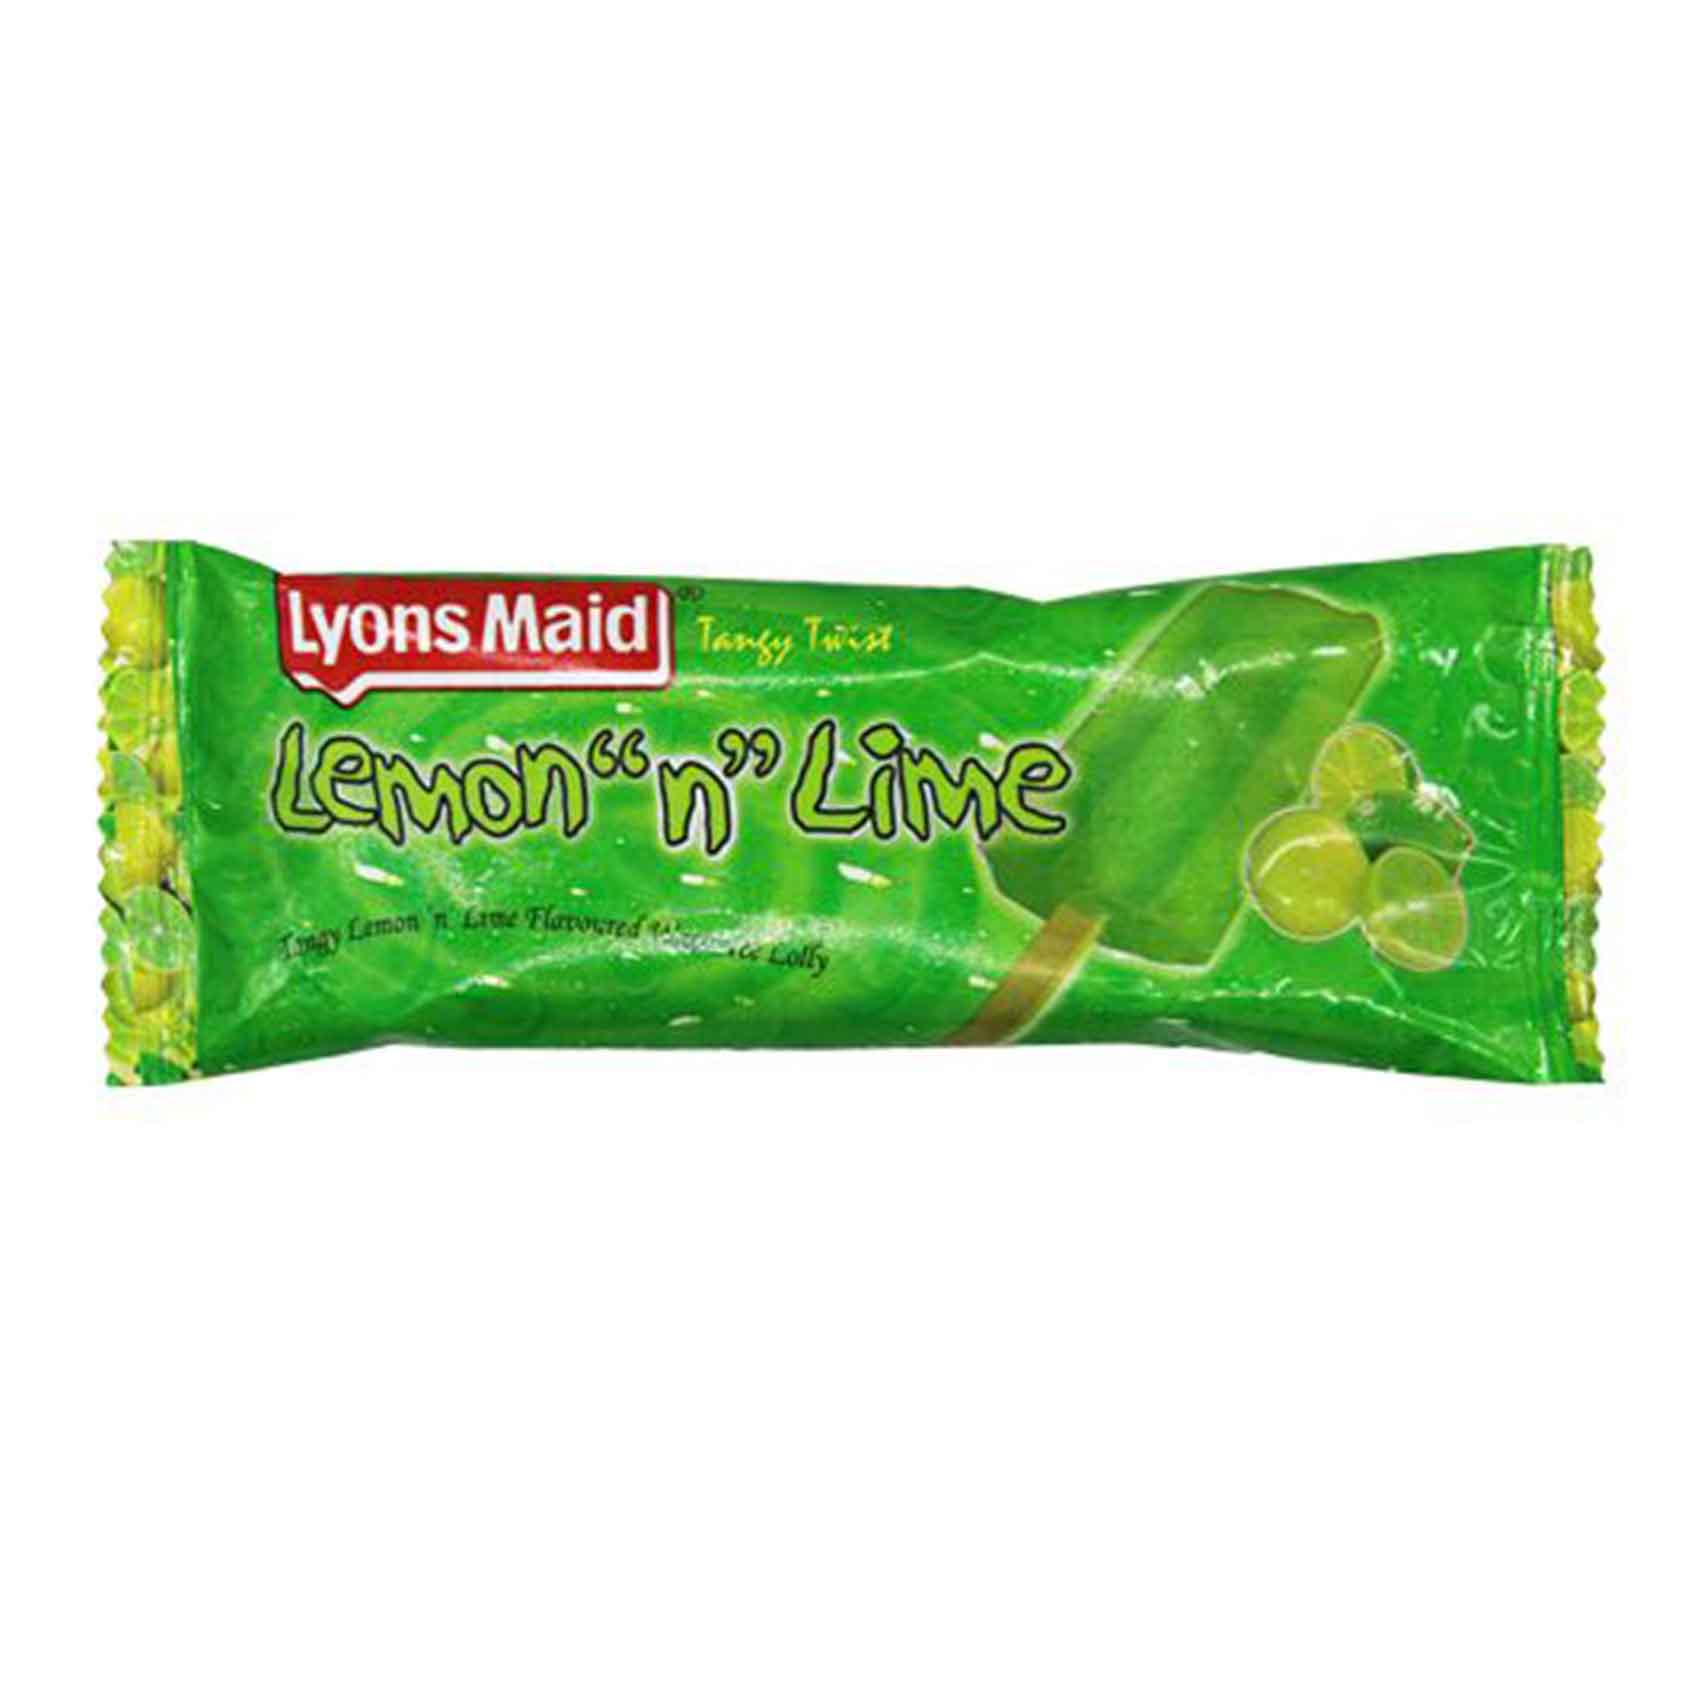 Lyons Maid Lemon And Lime Lolly Ice Cream Stick 55ml